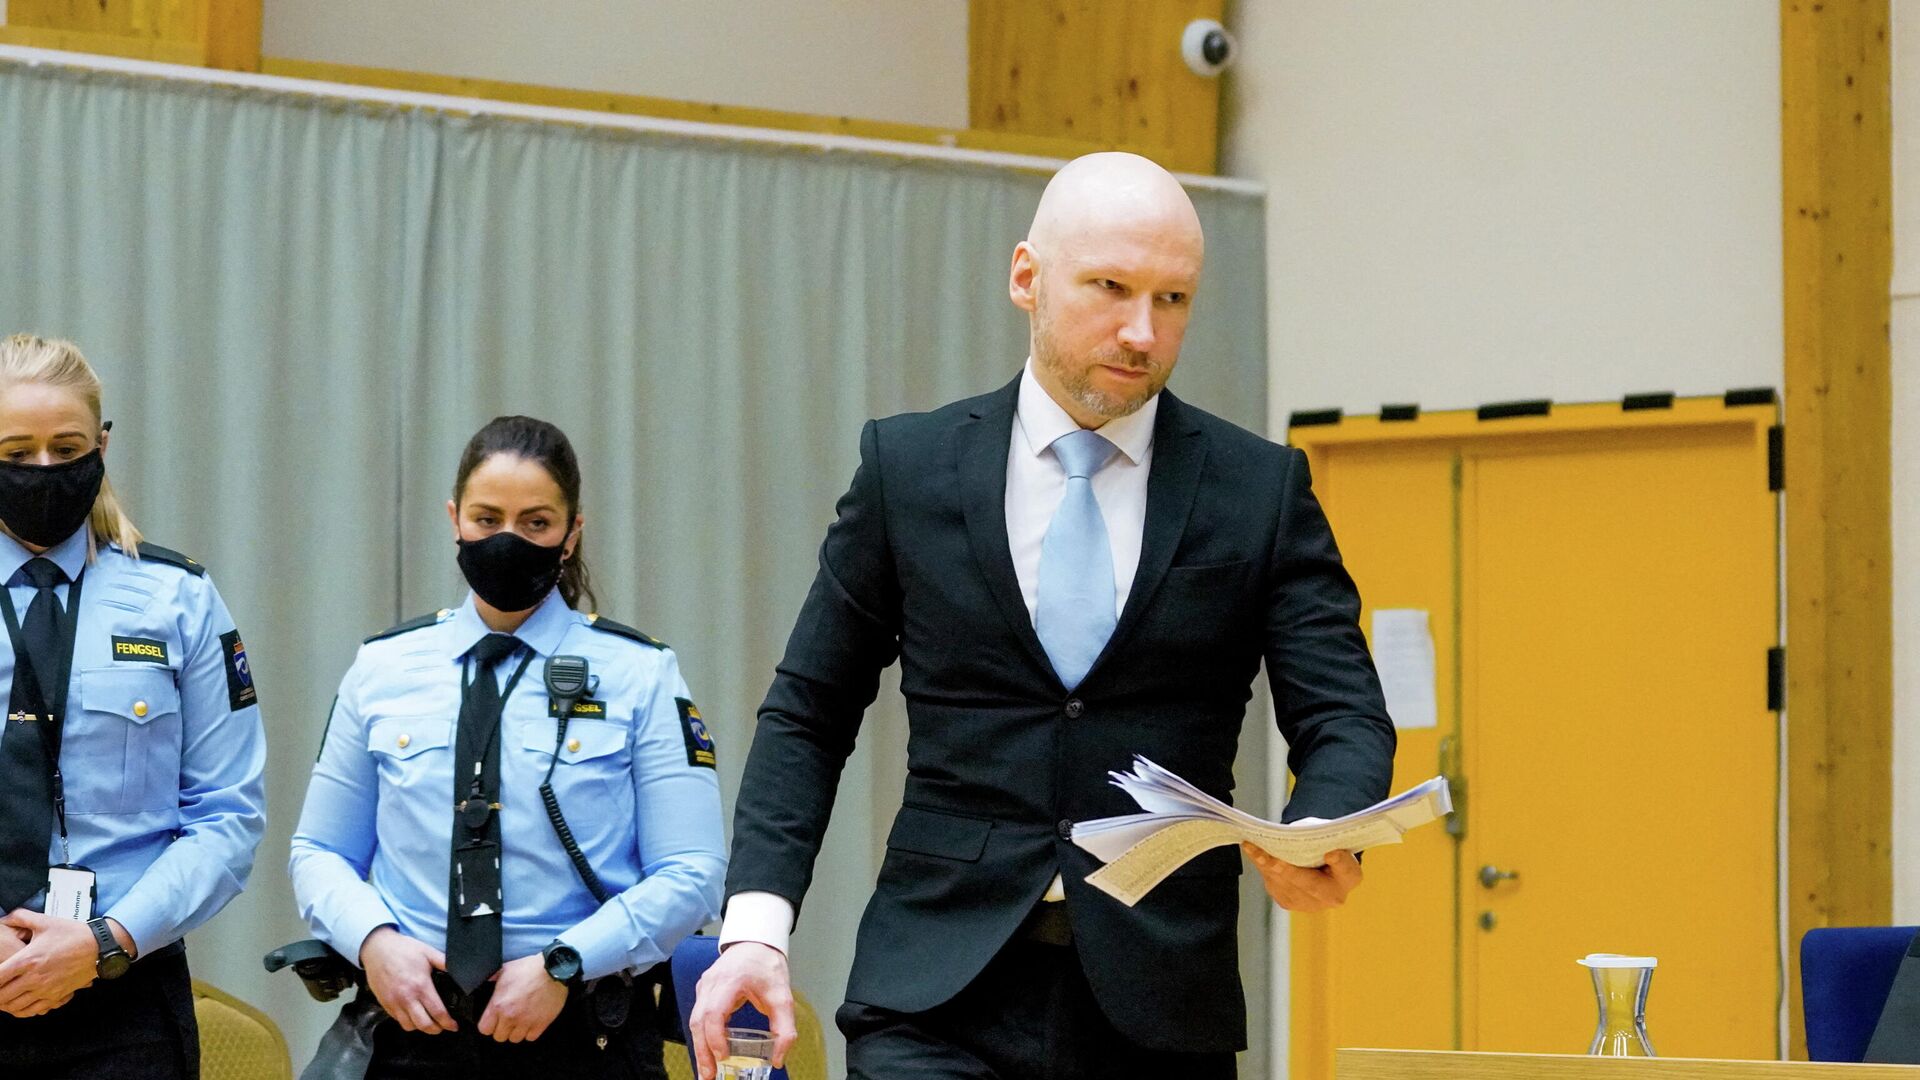 Mass killer Anders Behring Breivik, arrives at the makeshift courtroom in Skien prison on the second day of the trial, where he is requesting release on parole, in Skien, Norway January 19, 2022. Ole Berg-Rusten/NTB/via REUTERS   - Sputnik International, 1920, 01.02.2022